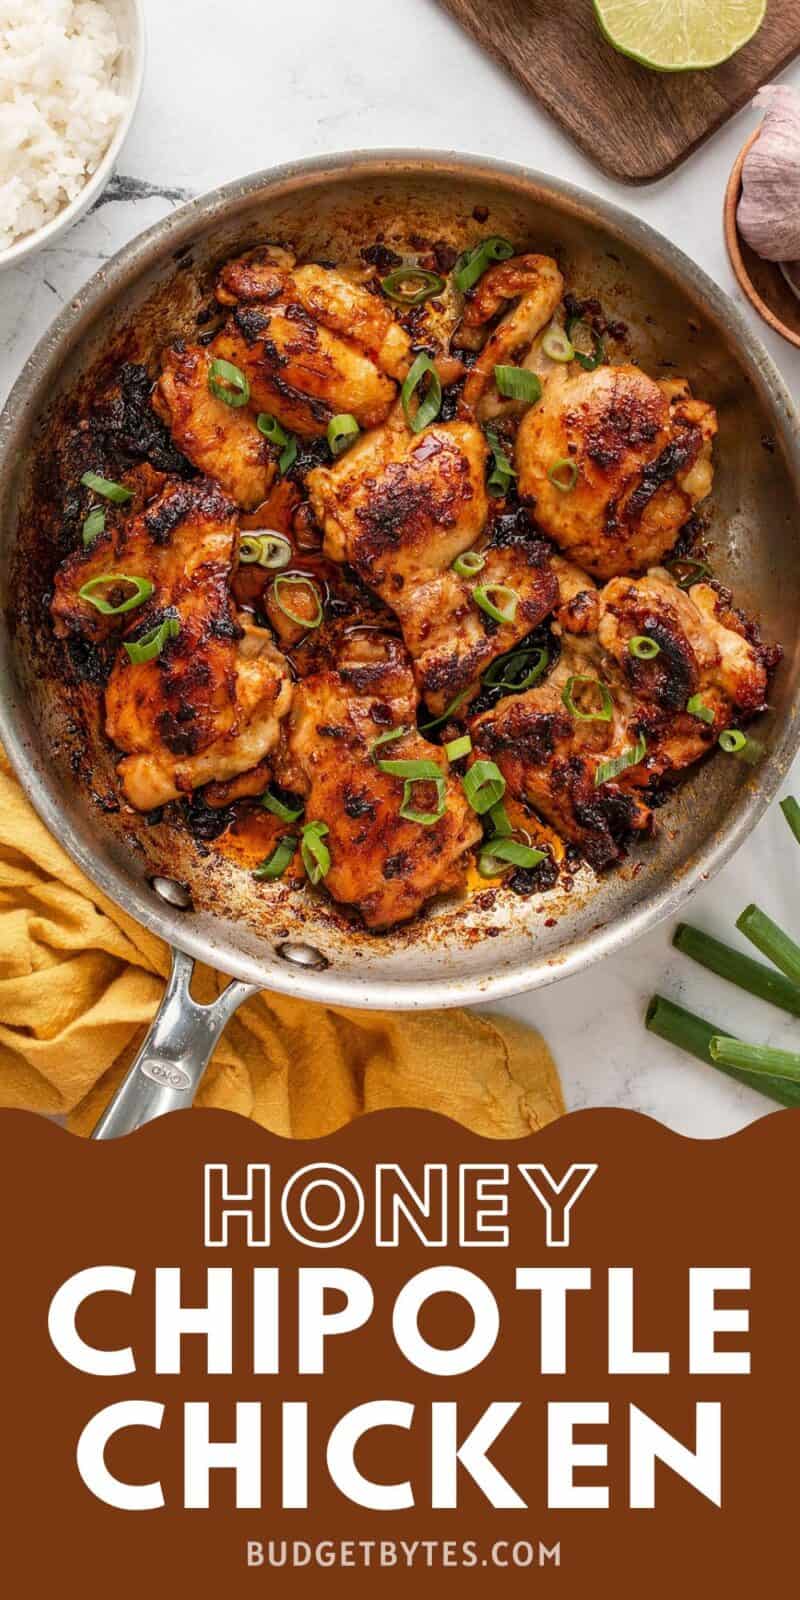 Honey Chipotle Chicken in the skillet with title text at the bottom.